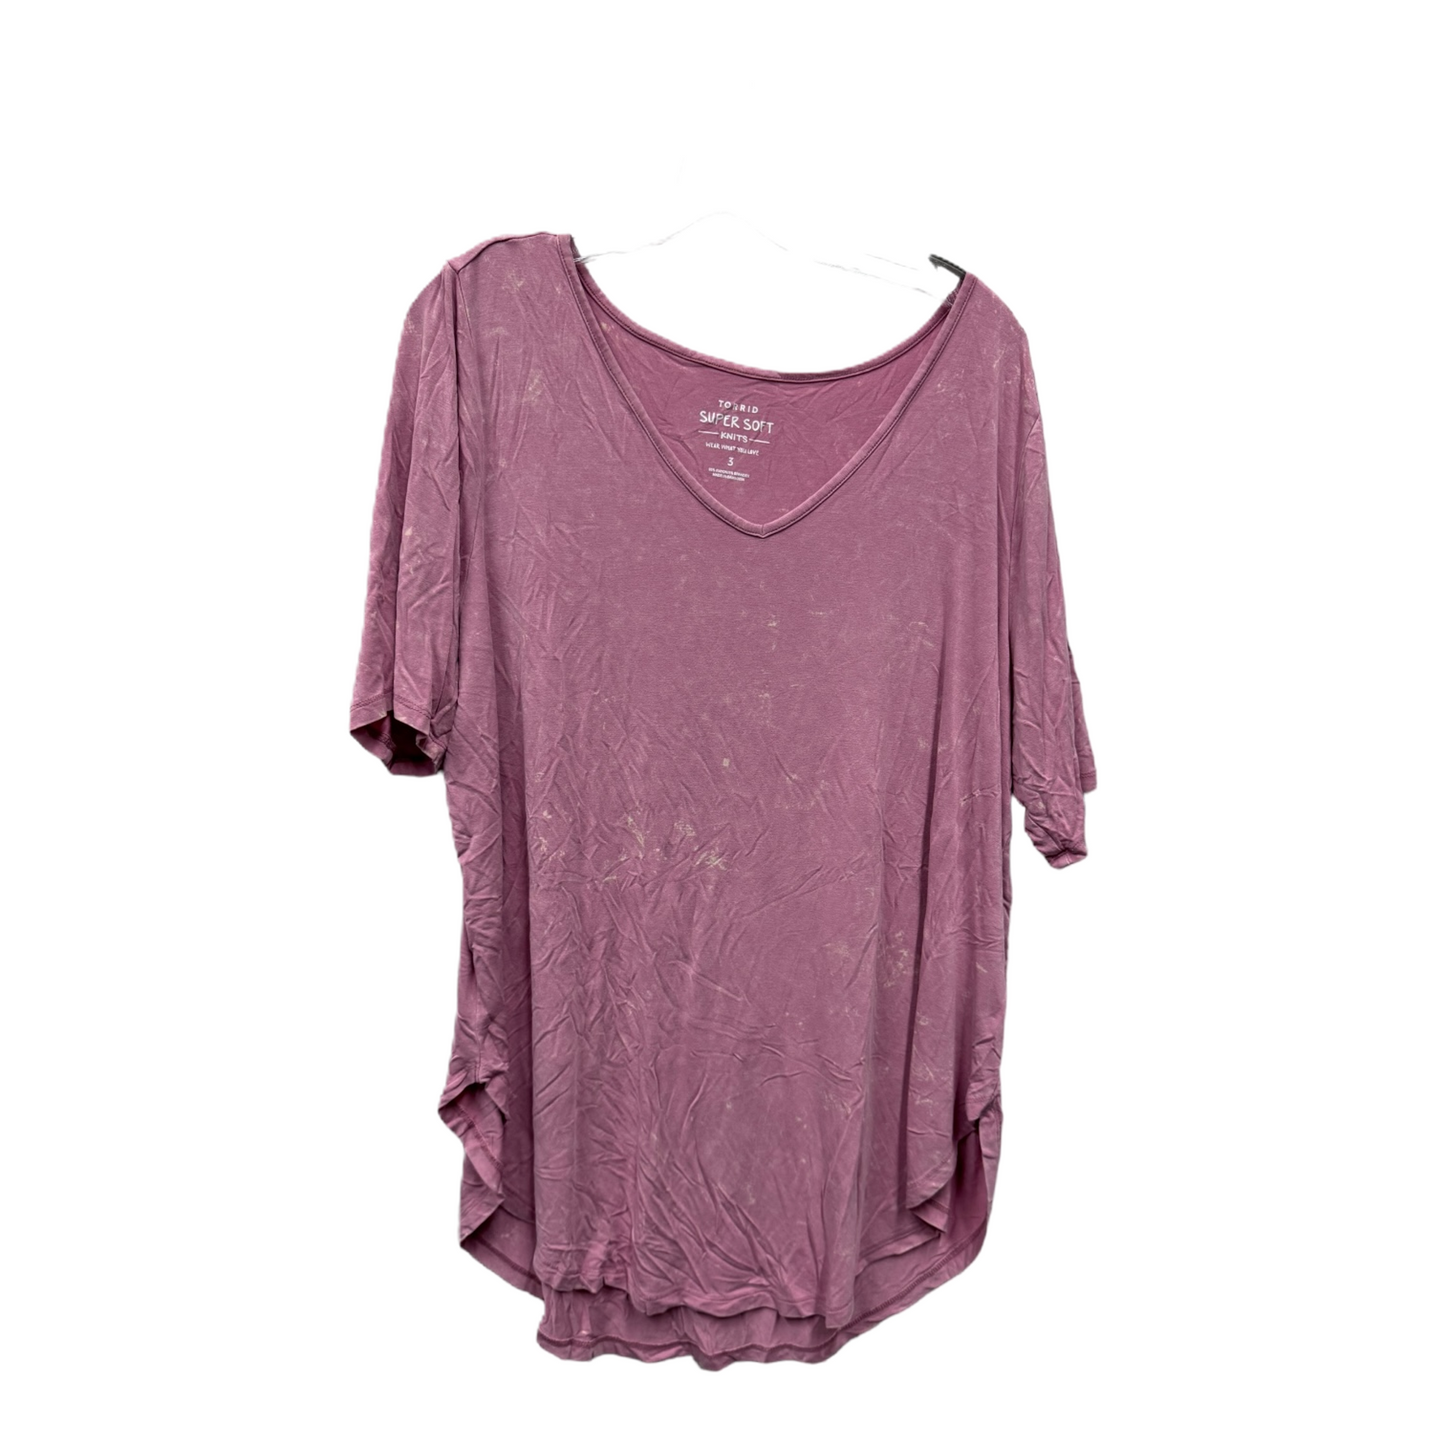 Pink Top Short Sleeve By Torrid, Size: 3x